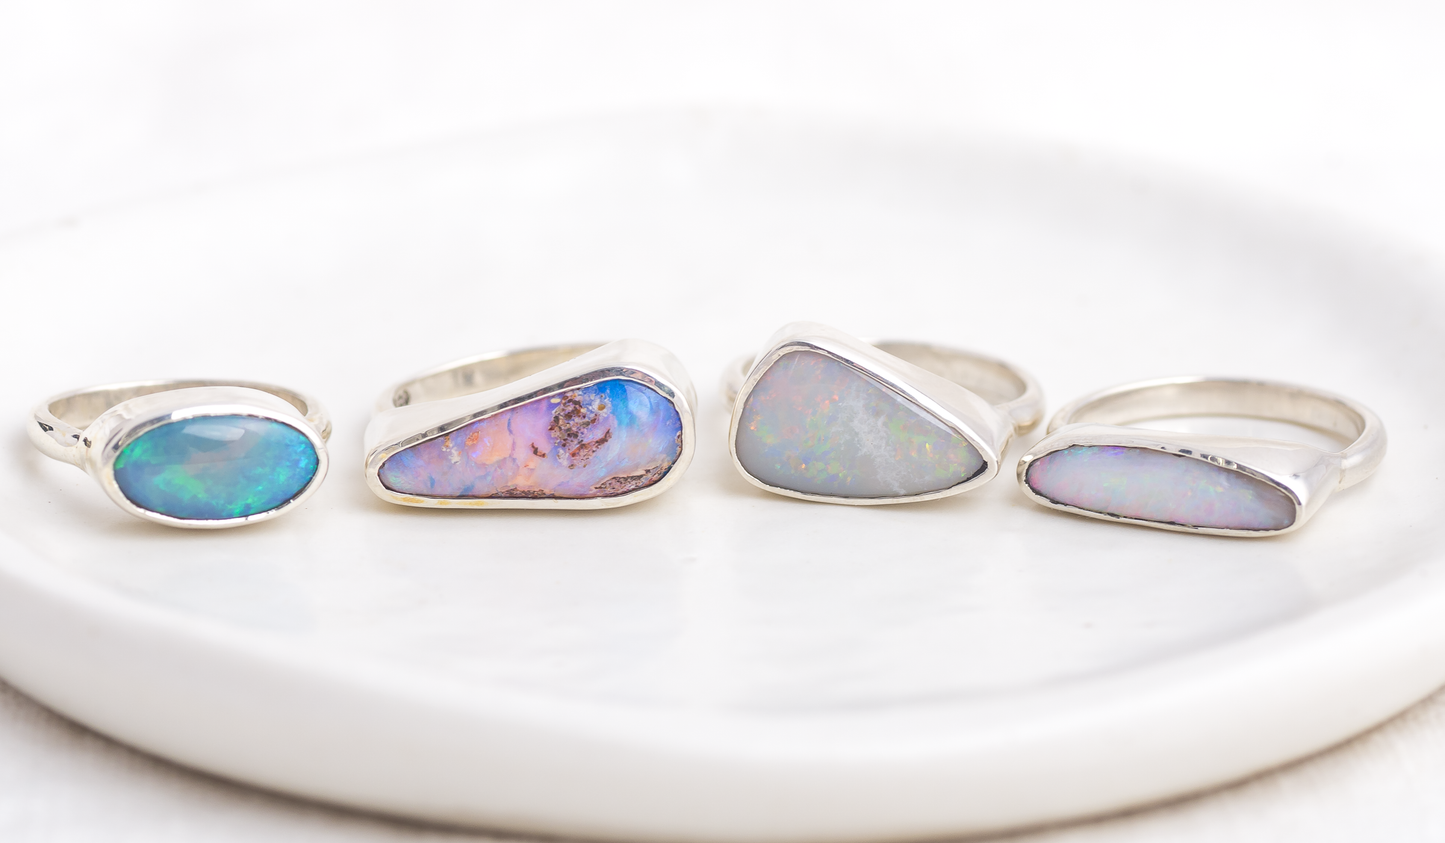 Opal East West Ring #8 ◇ Australian Opal ◇ Made in your size.